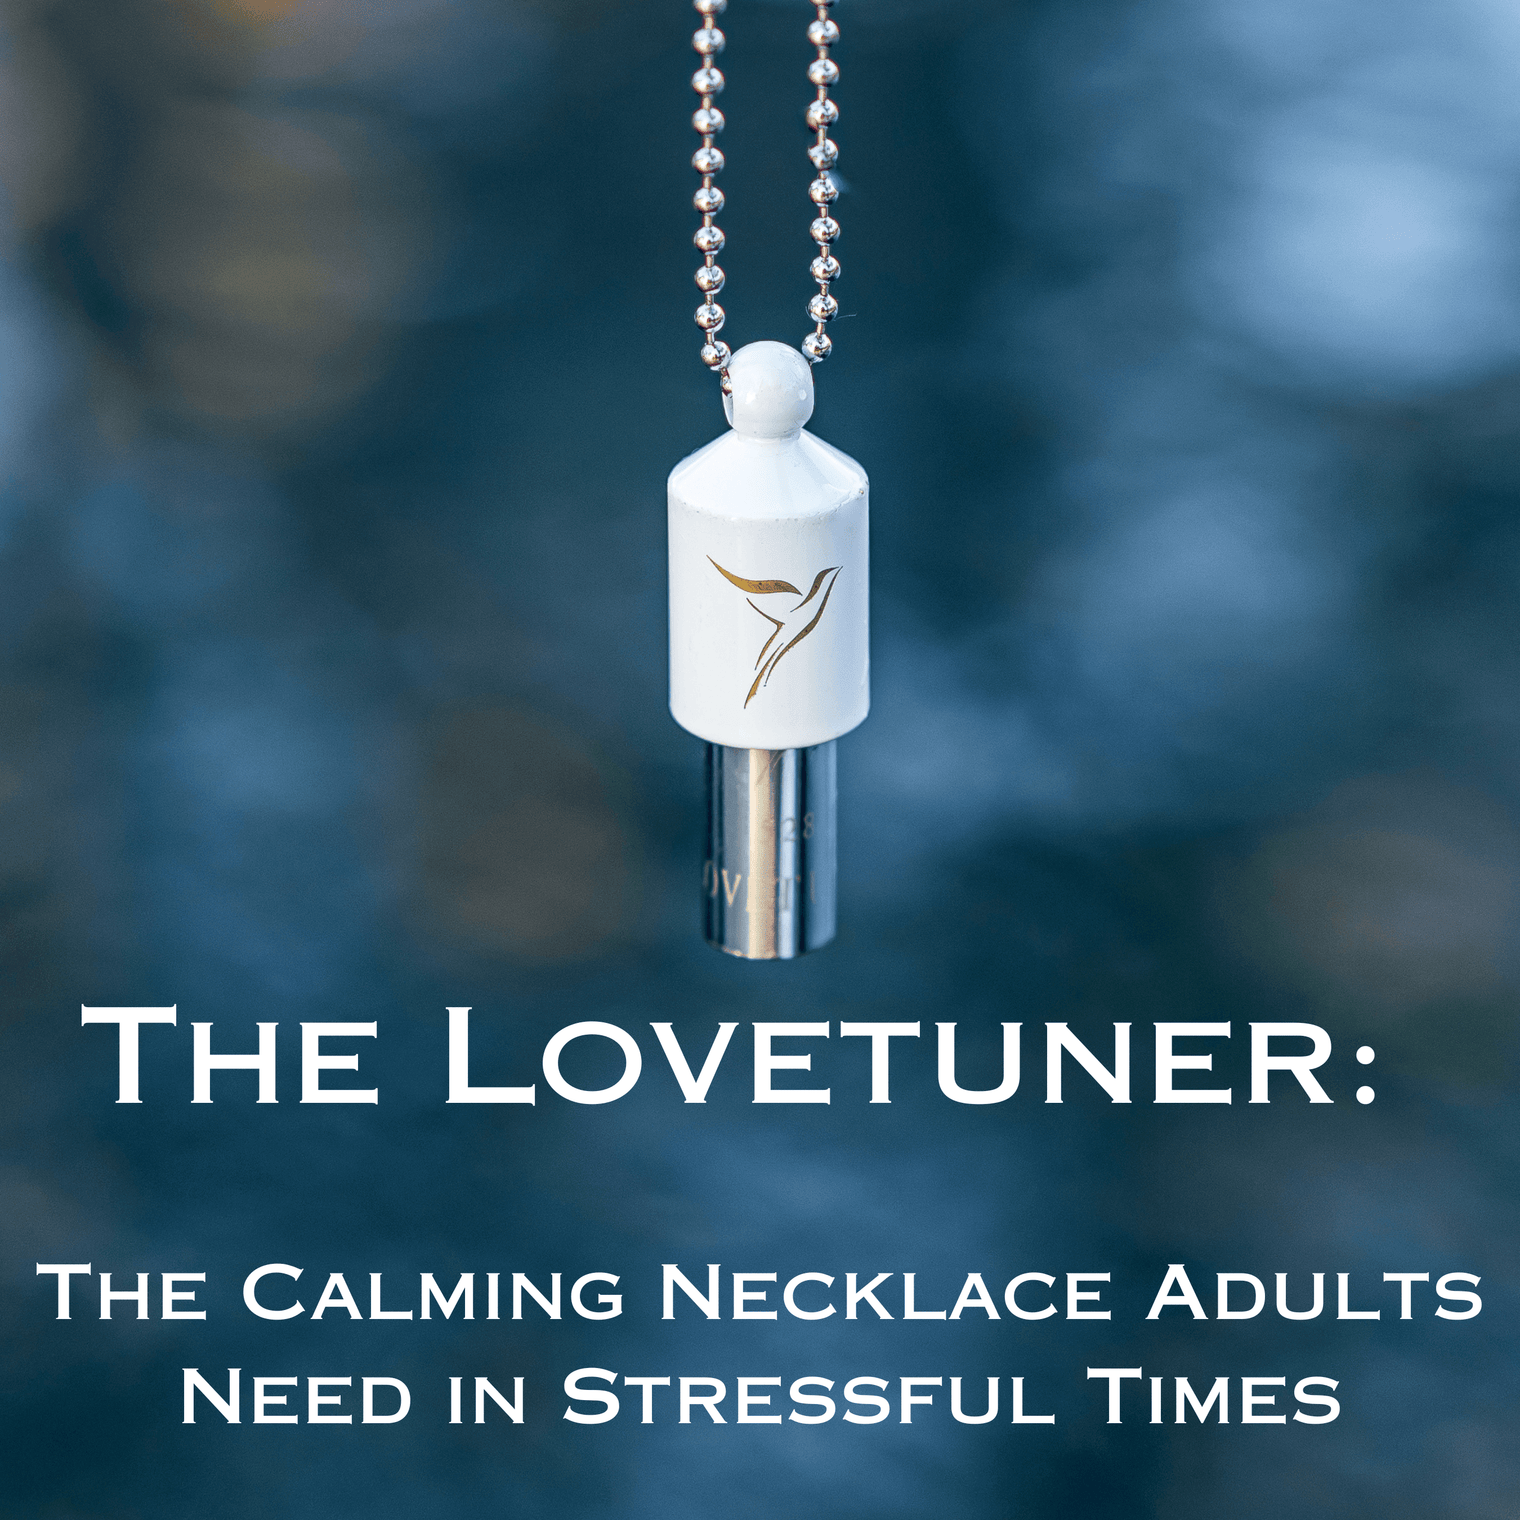 The Lovetuner: The Calming Necklace Adults Need in Stressful Times